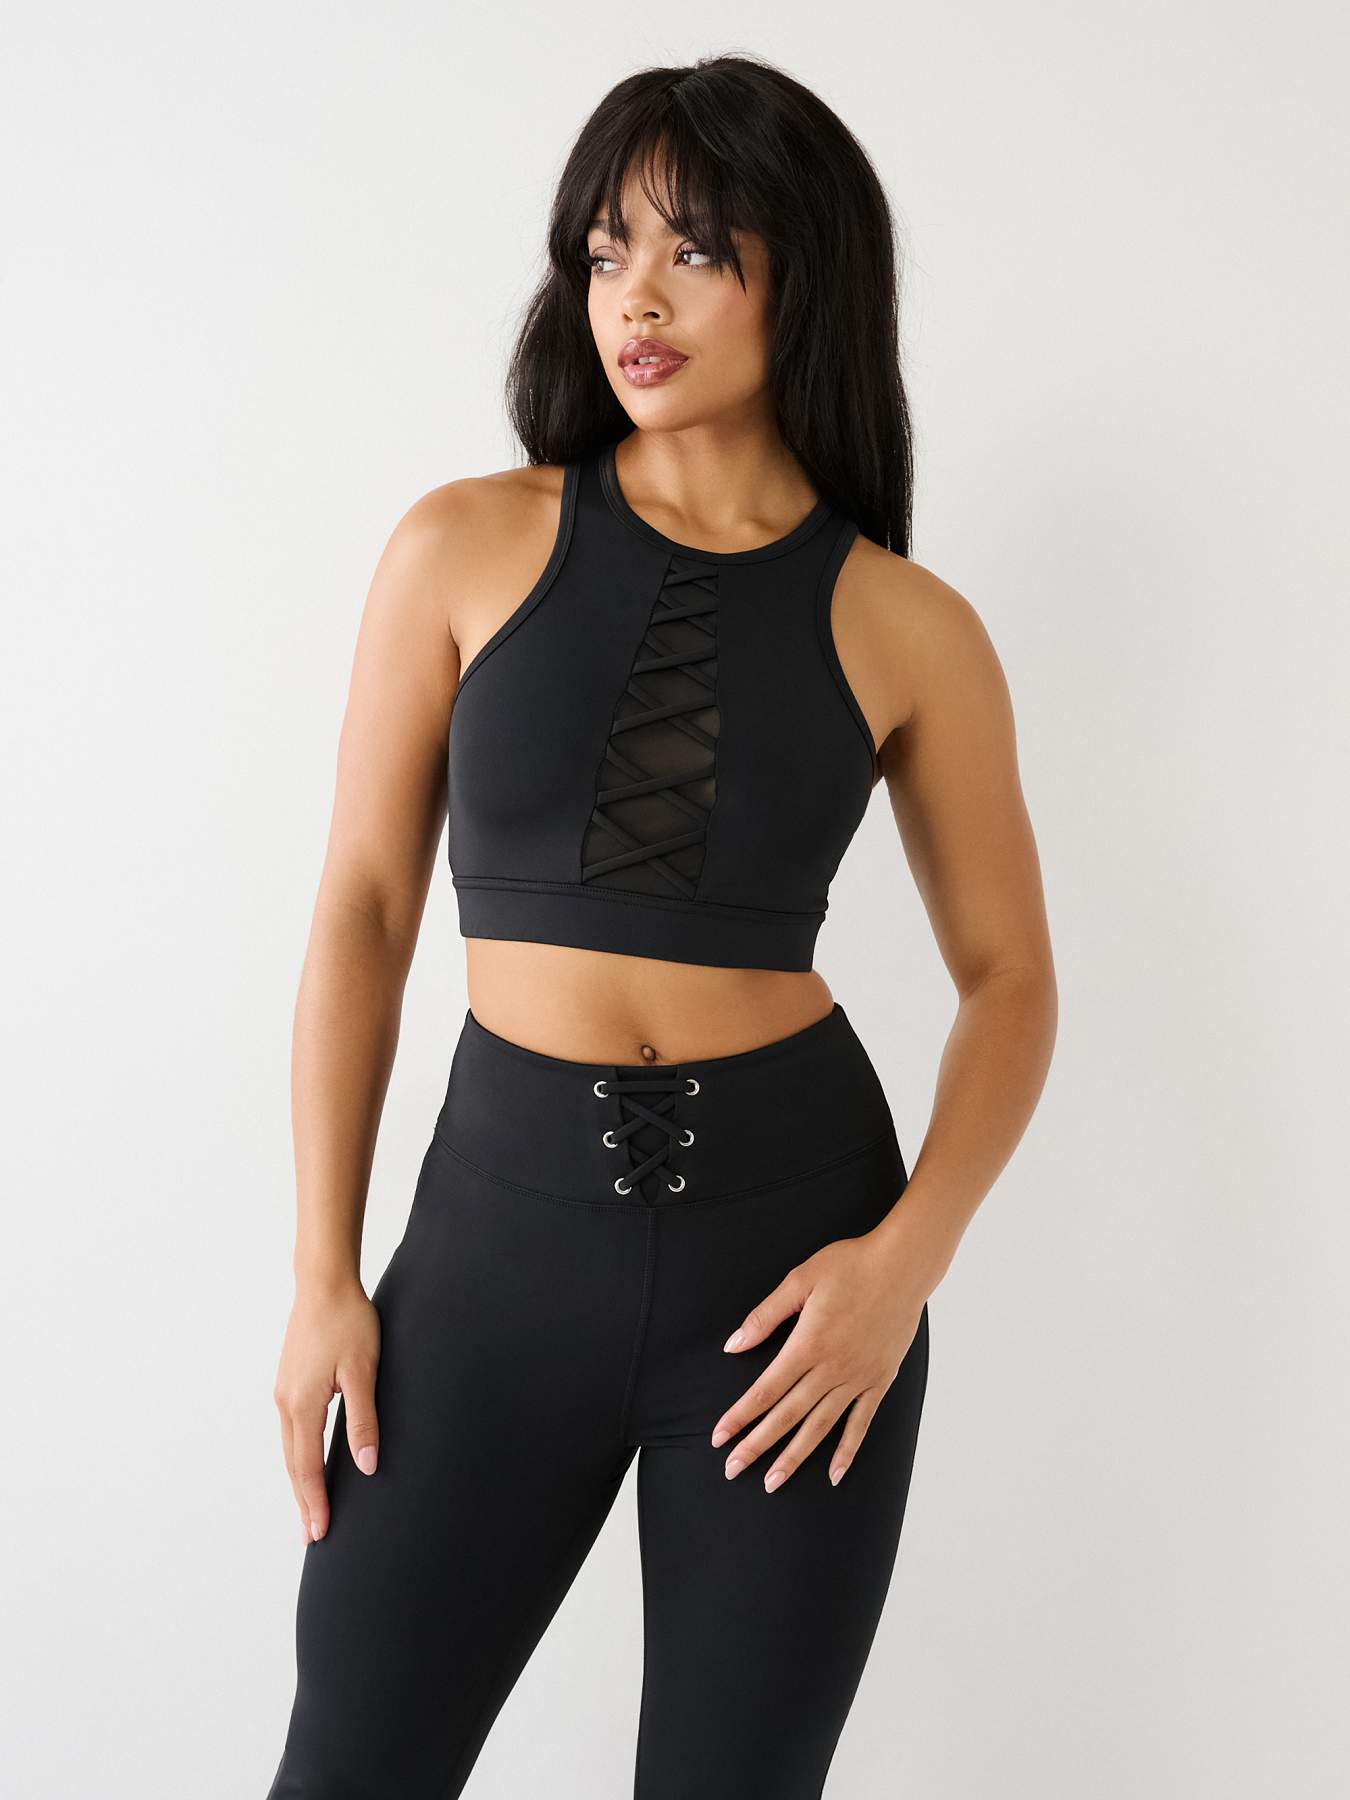 LACE UP SPORTS BRA TOP